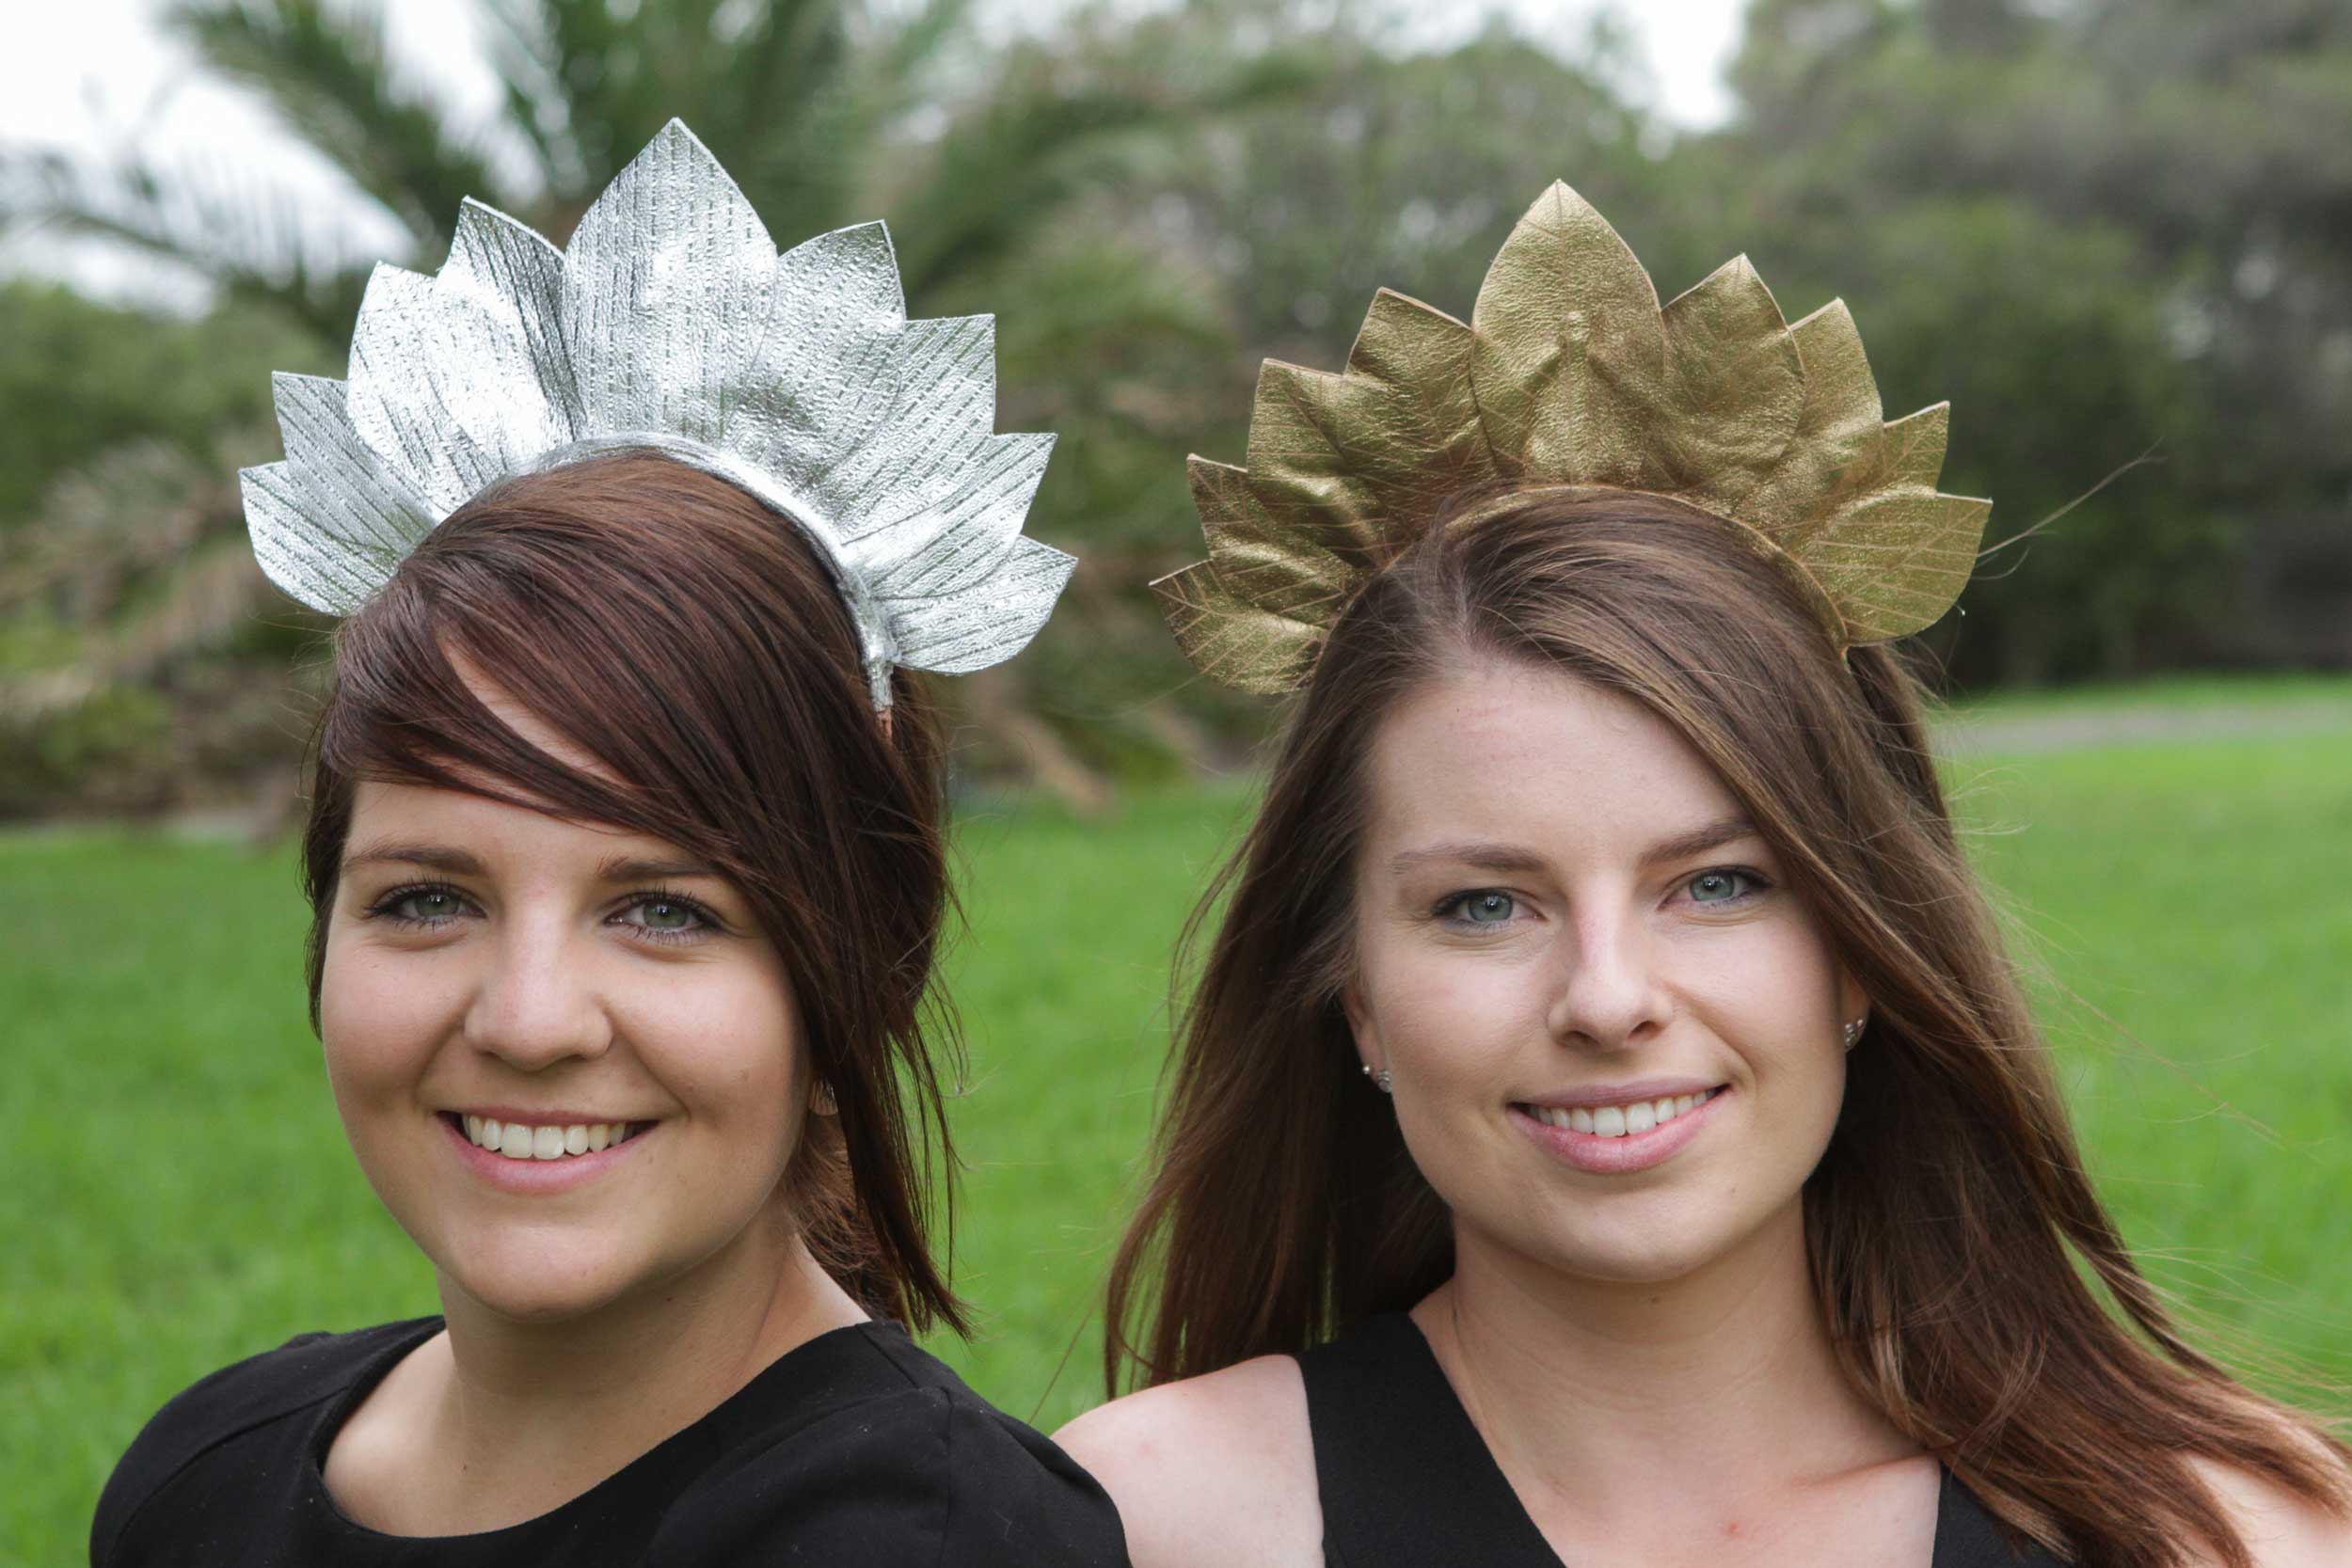 Tara-wears-a-silver-leather-leaf-design-headband-and-Hayley-wears-the-same-design-in-gold.